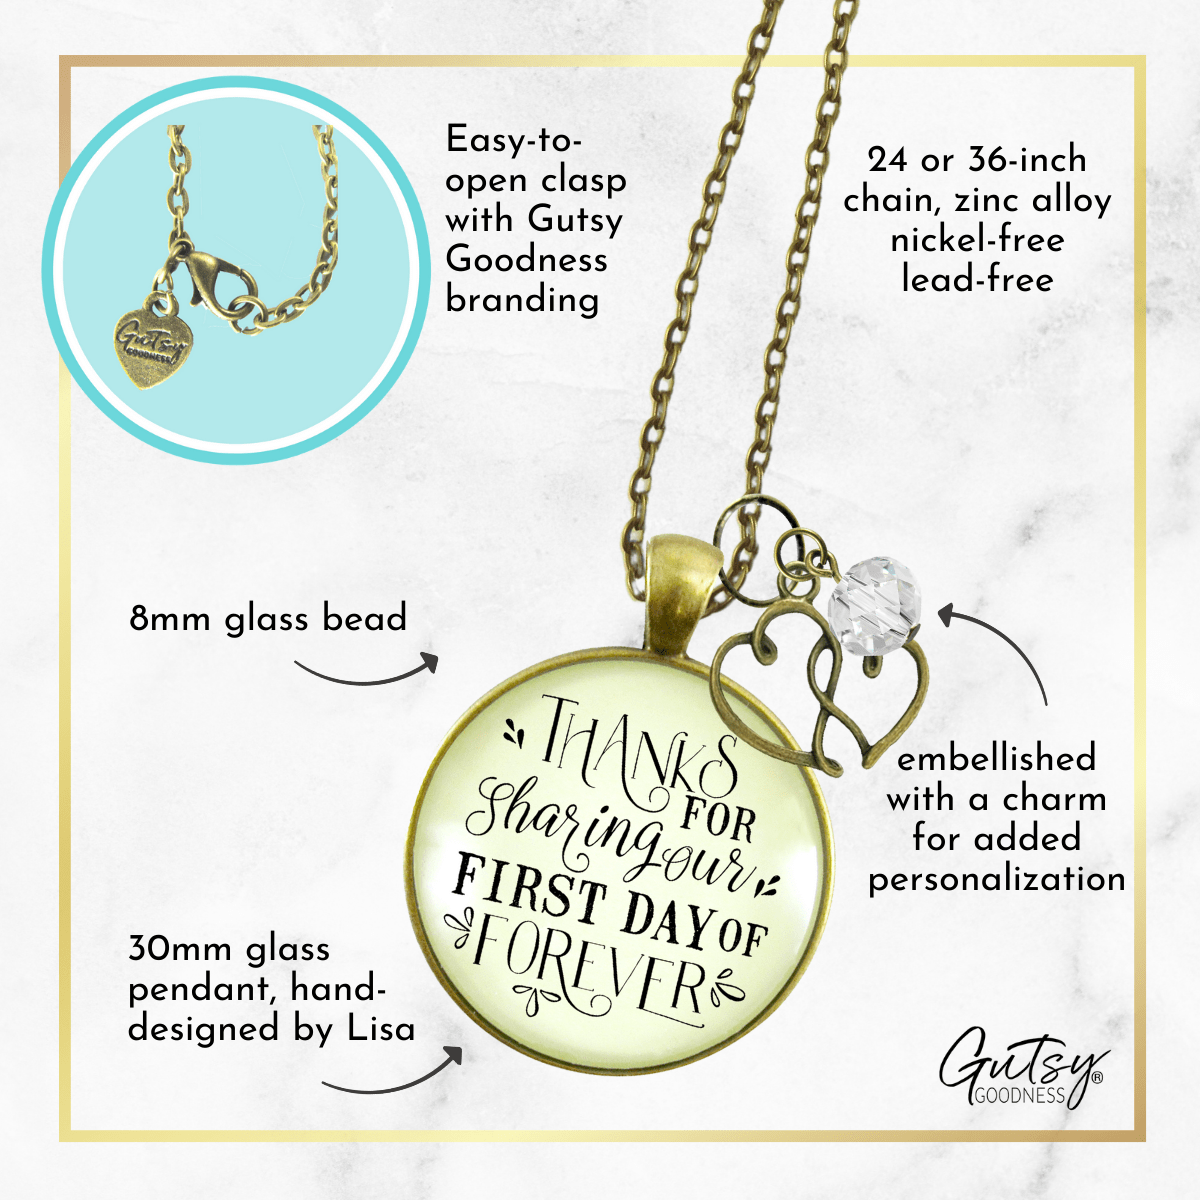 Gutsy Goodness Wedding Coordinator Gift Necklace Thanks for Sharing Our Day Jewelry - Gutsy Goodness Handmade Jewelry;Wedding Coordinator Gift Necklace Thanks For Sharing Our Day Jewelry - Gutsy Goodness Handmade Jewelry Gifts